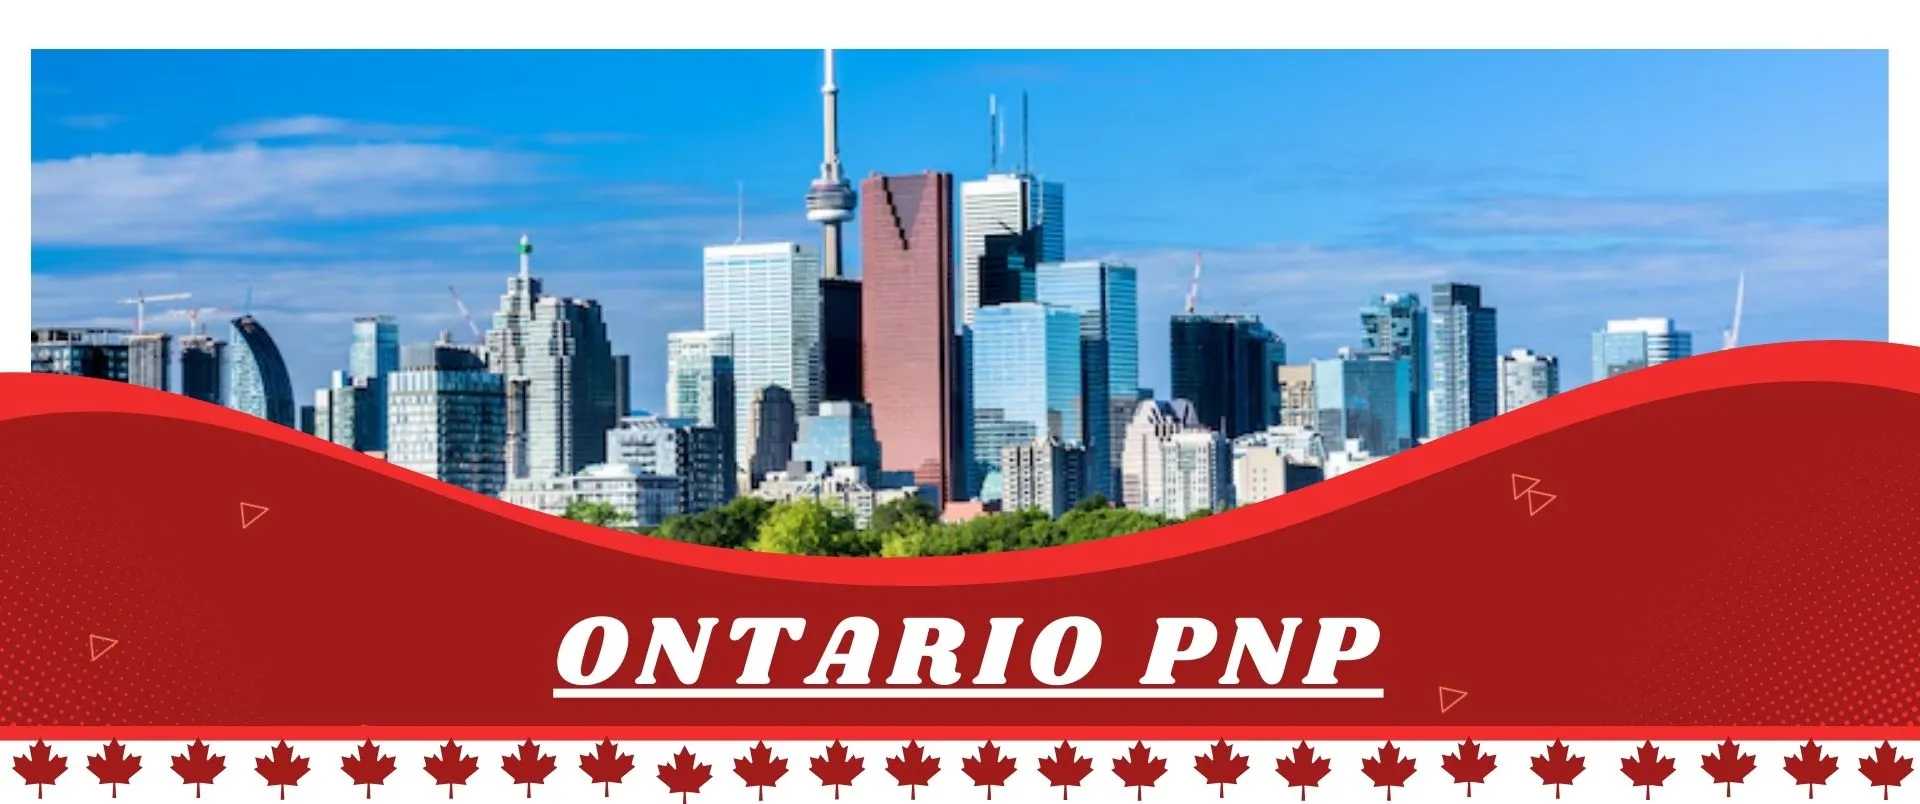 Ontario PNP Blue sky with Buildings created by Isha Immigration